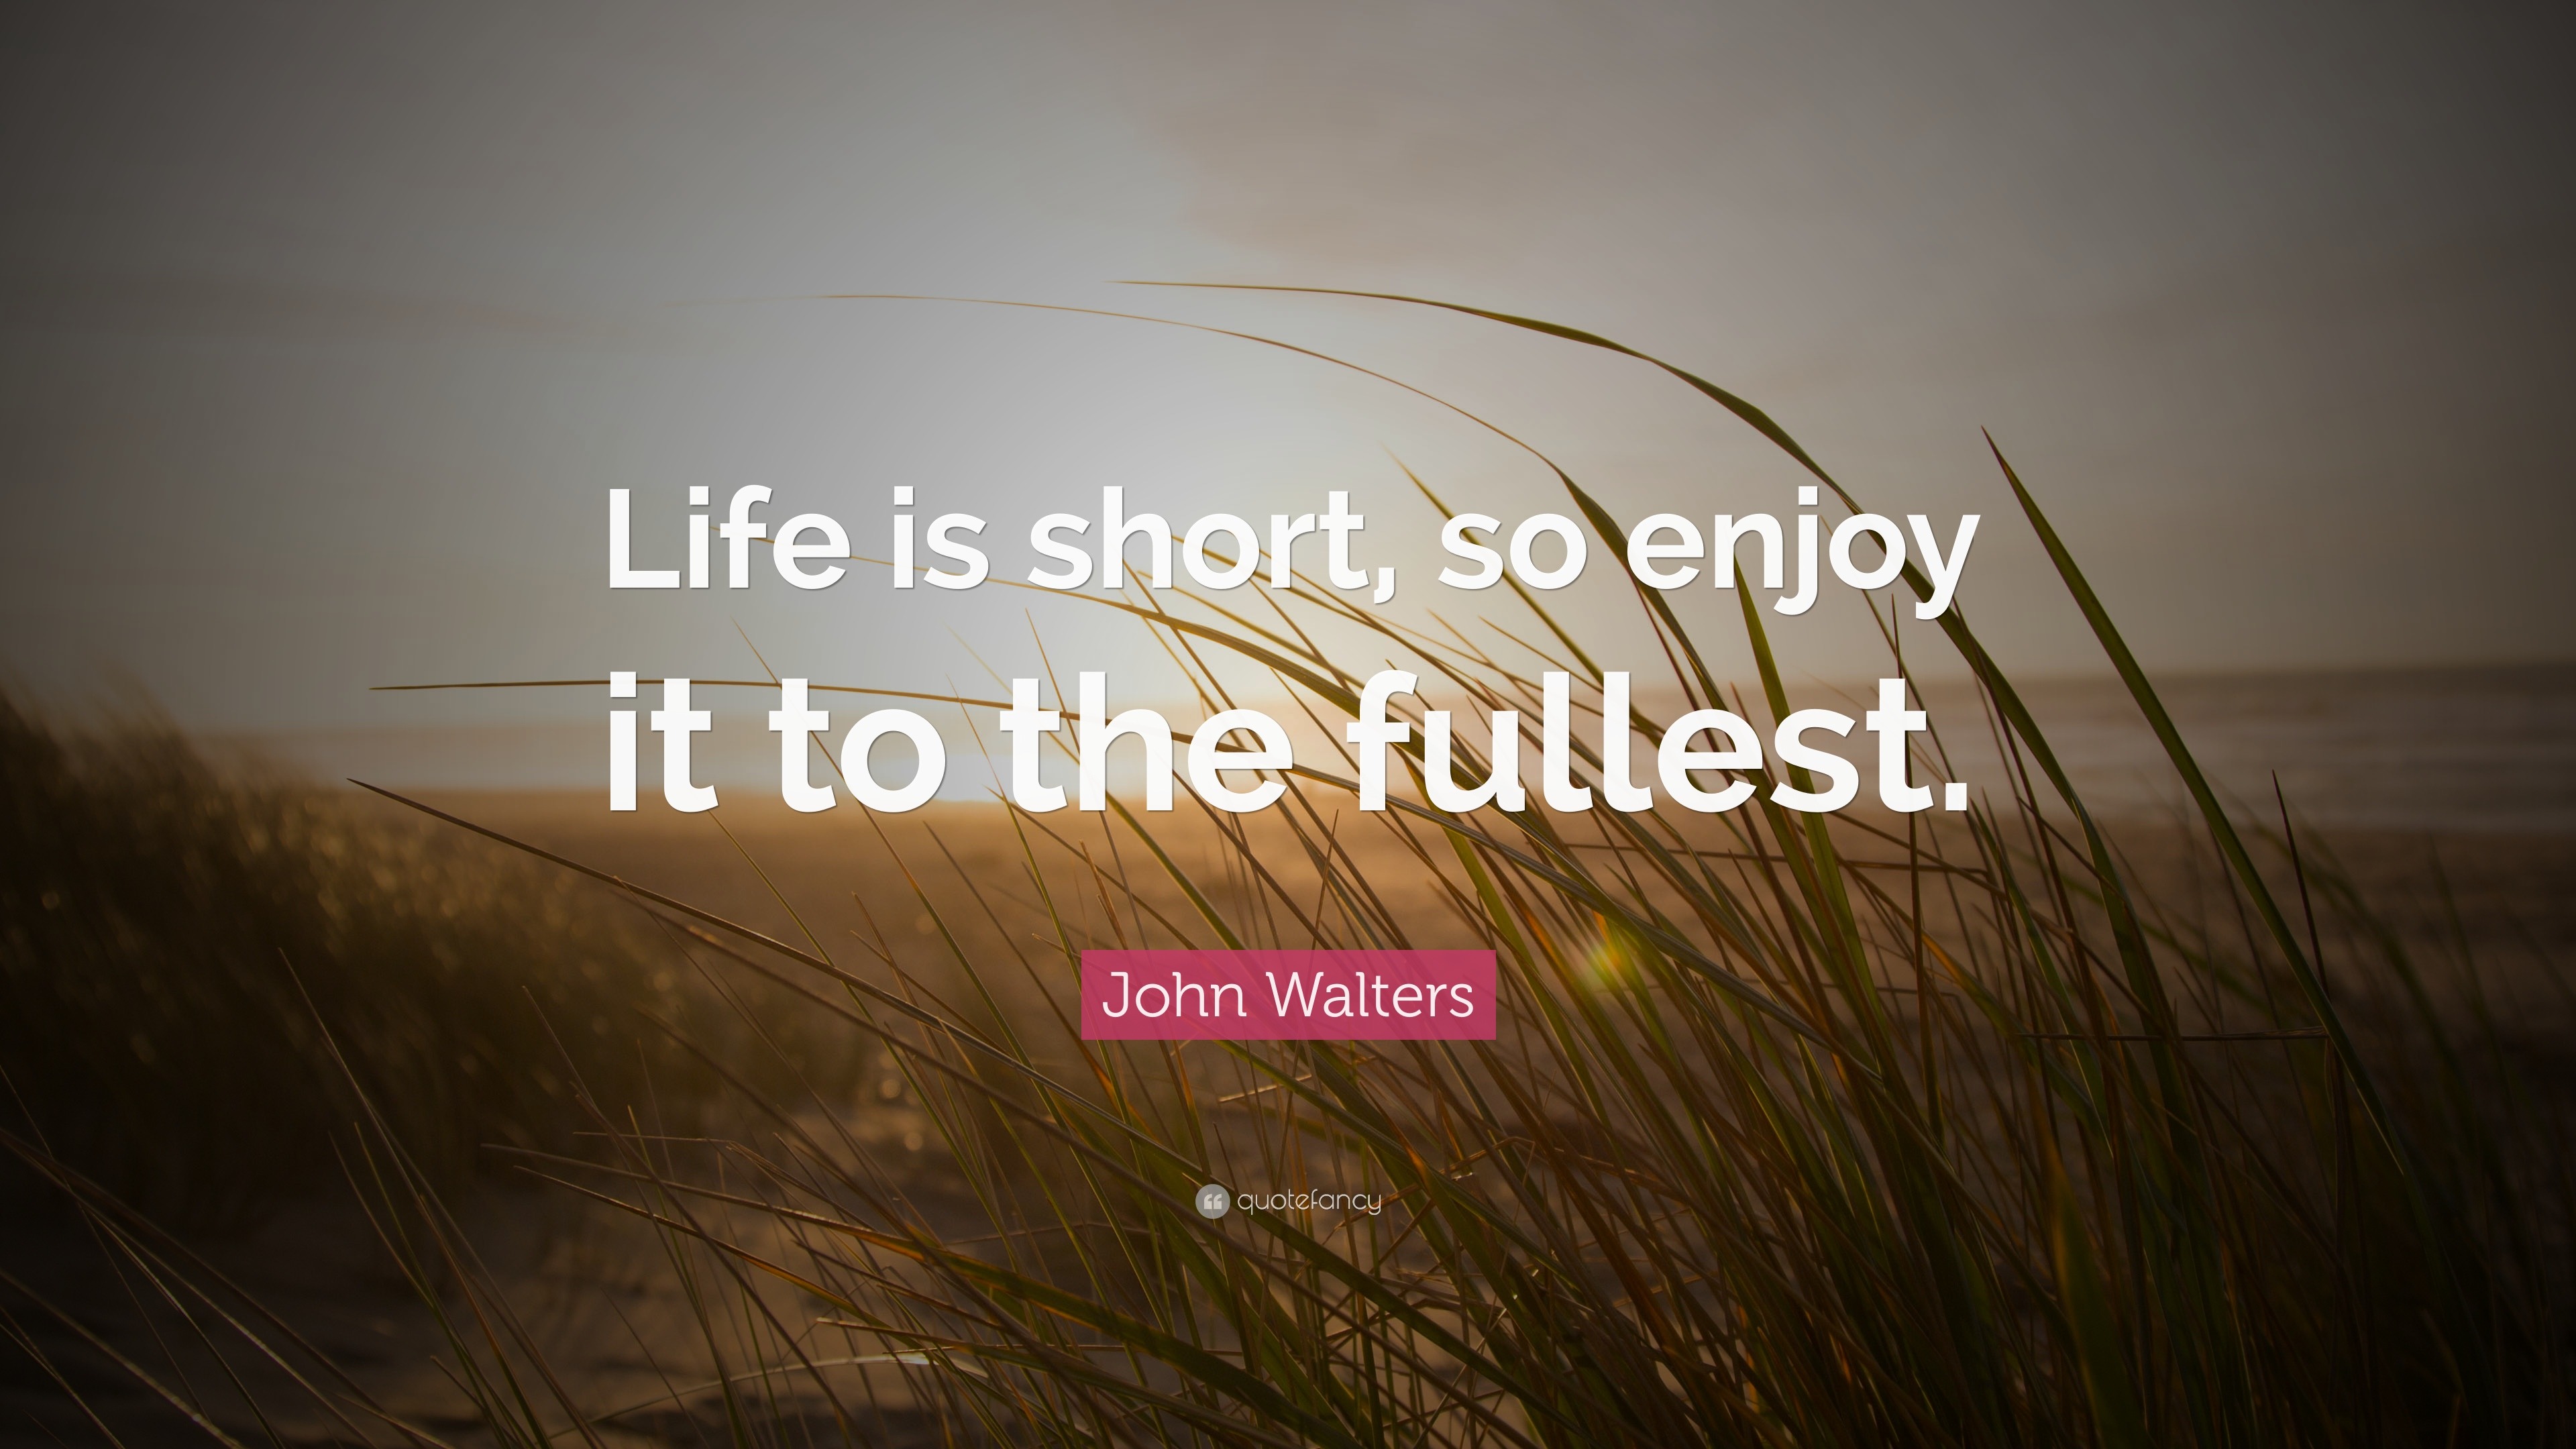 That's right, we all have one life, so enjoy it to its fullest